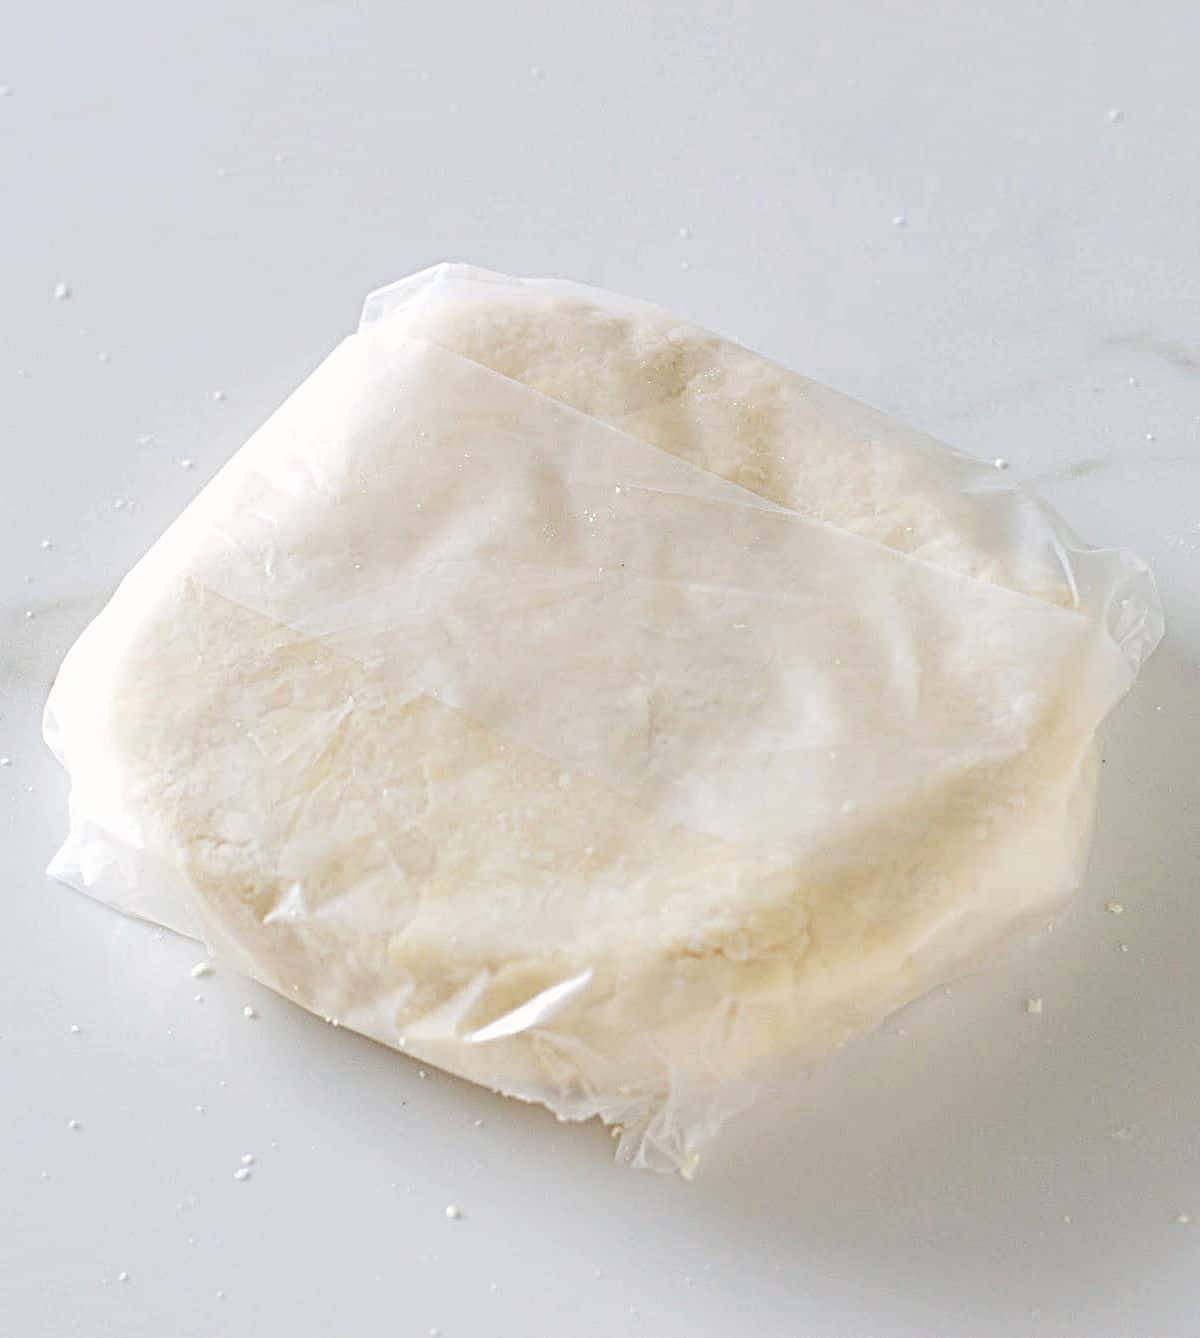 Disc of pie crust wrapped in plastic on a white surface.